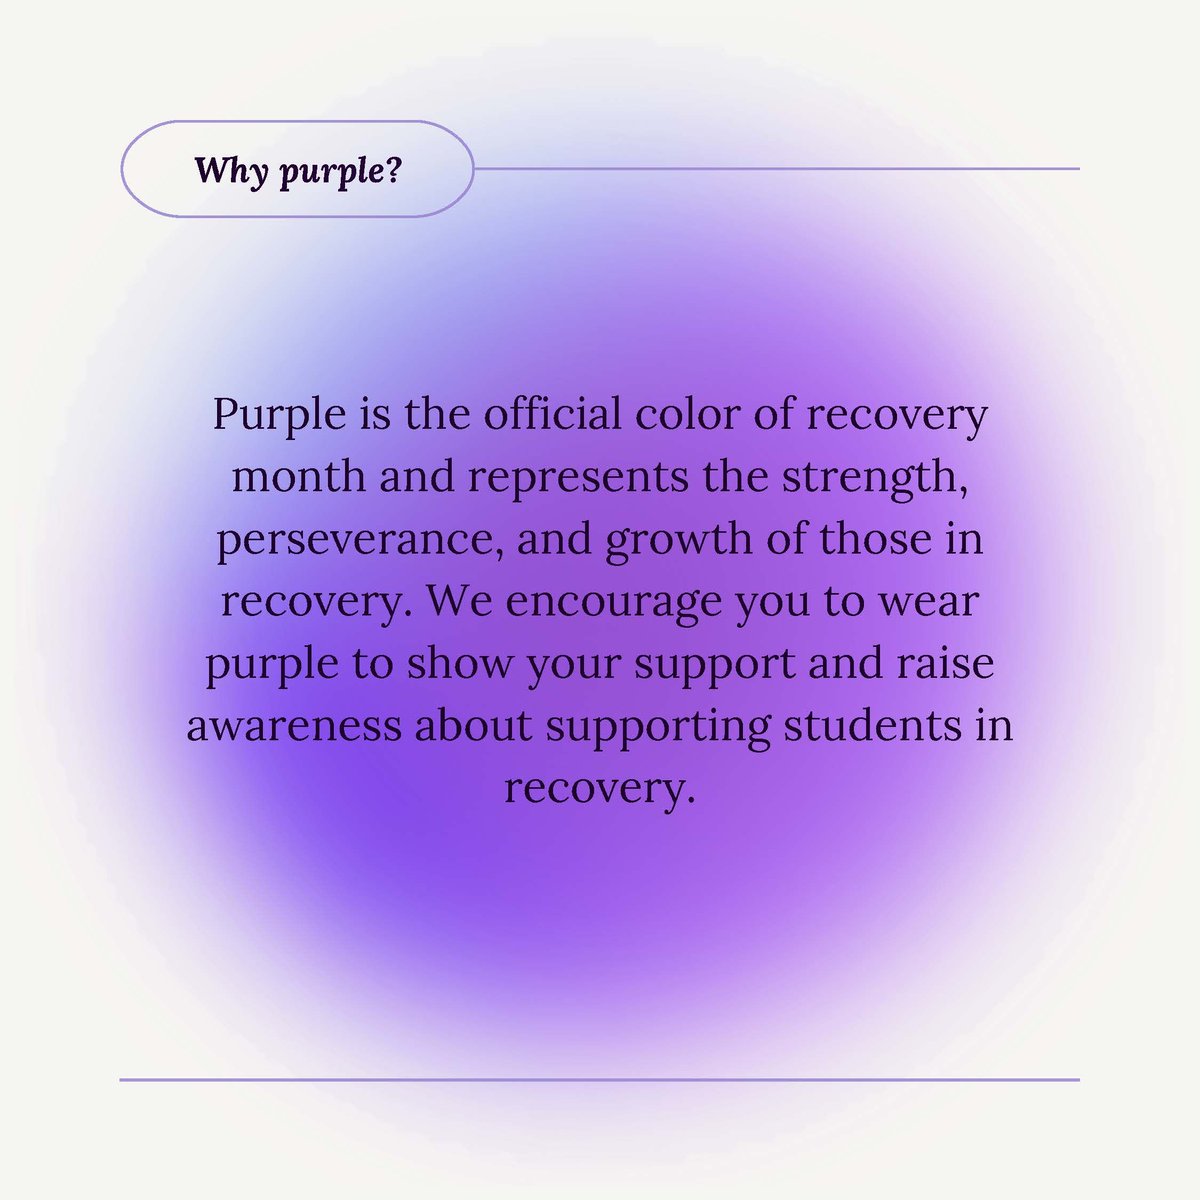 Join NRAP, Nevada's only #collegiaterecoveryprogram, in celebrating #CollegiateRecoveryWeek by wearing #PurpleForRecovery on Monday, April 15th! For more information about why we celebrate #collegiaterecovery, visit: buff.ly/43Xut7j. #WearPurple #CollegiateRecoveryDay